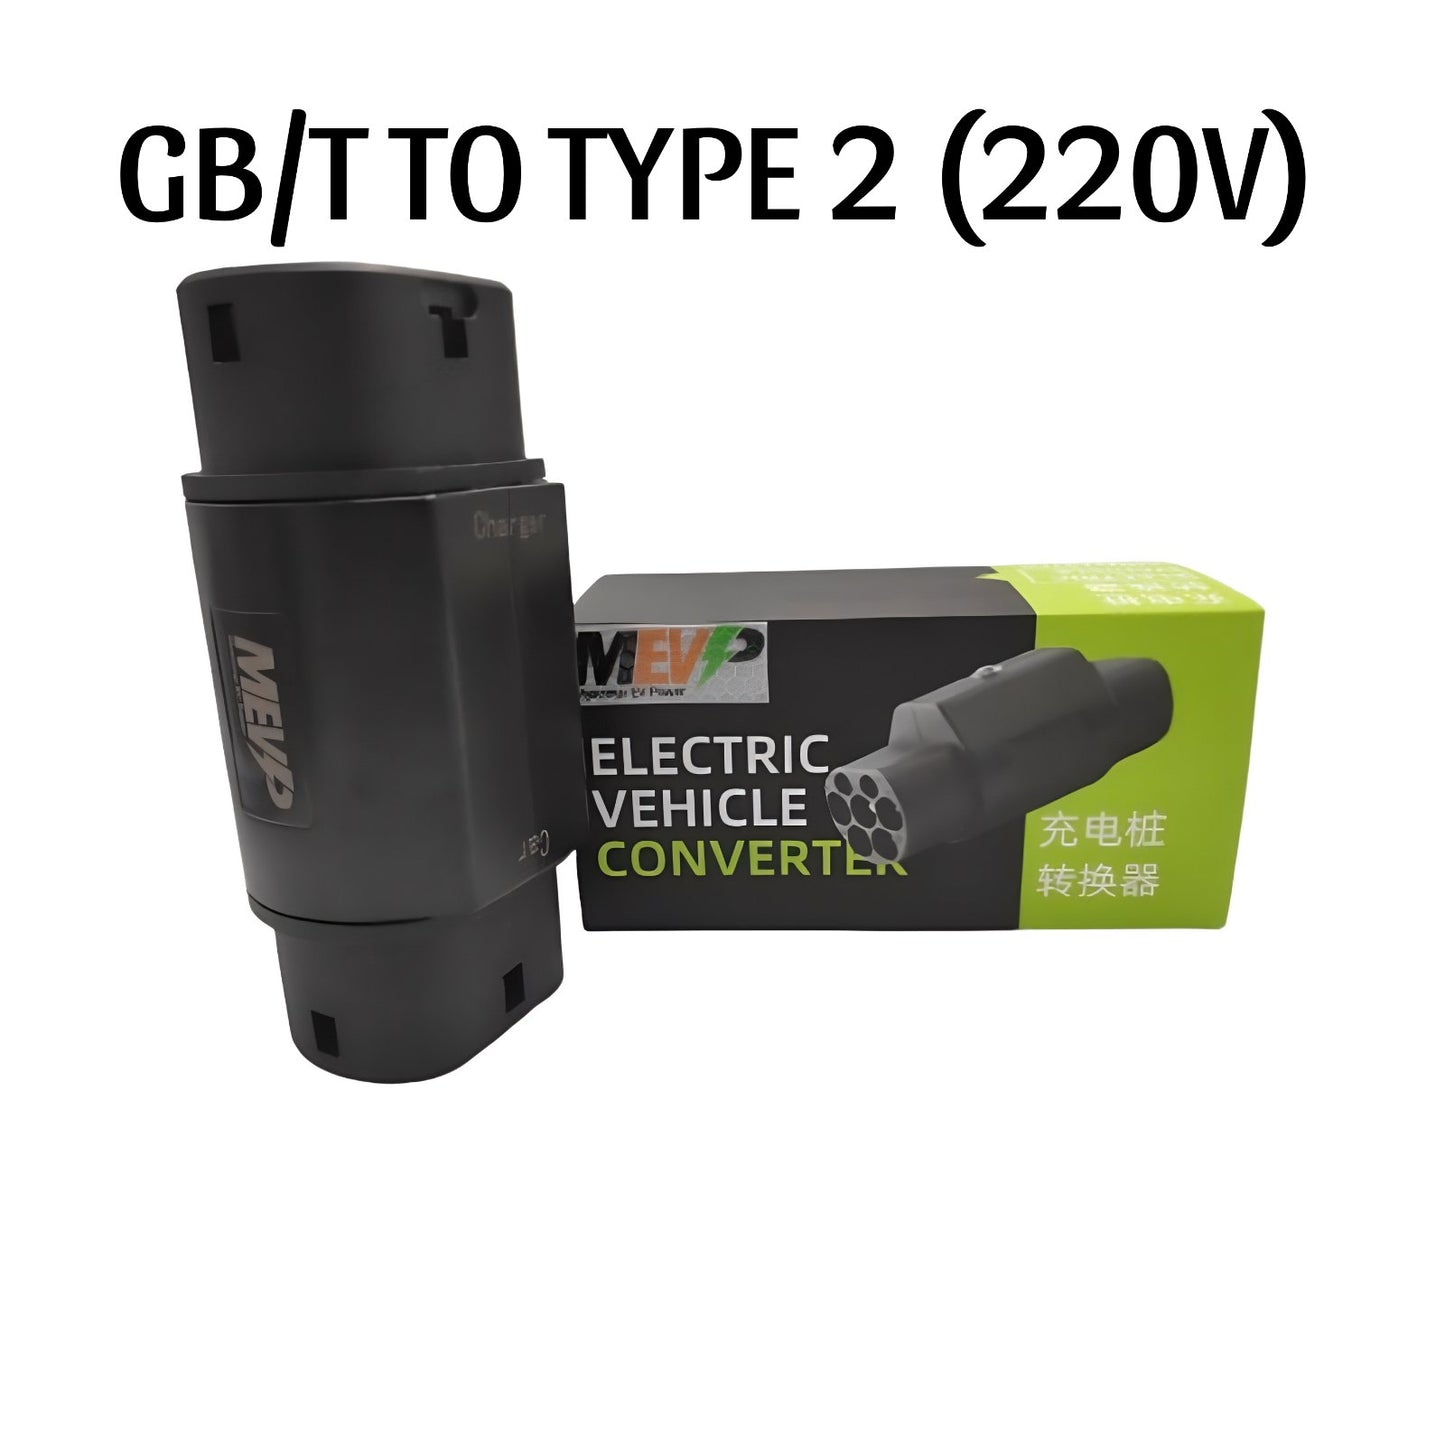 GB/T TO TYPE 2 (220V) EV ADAPTERS